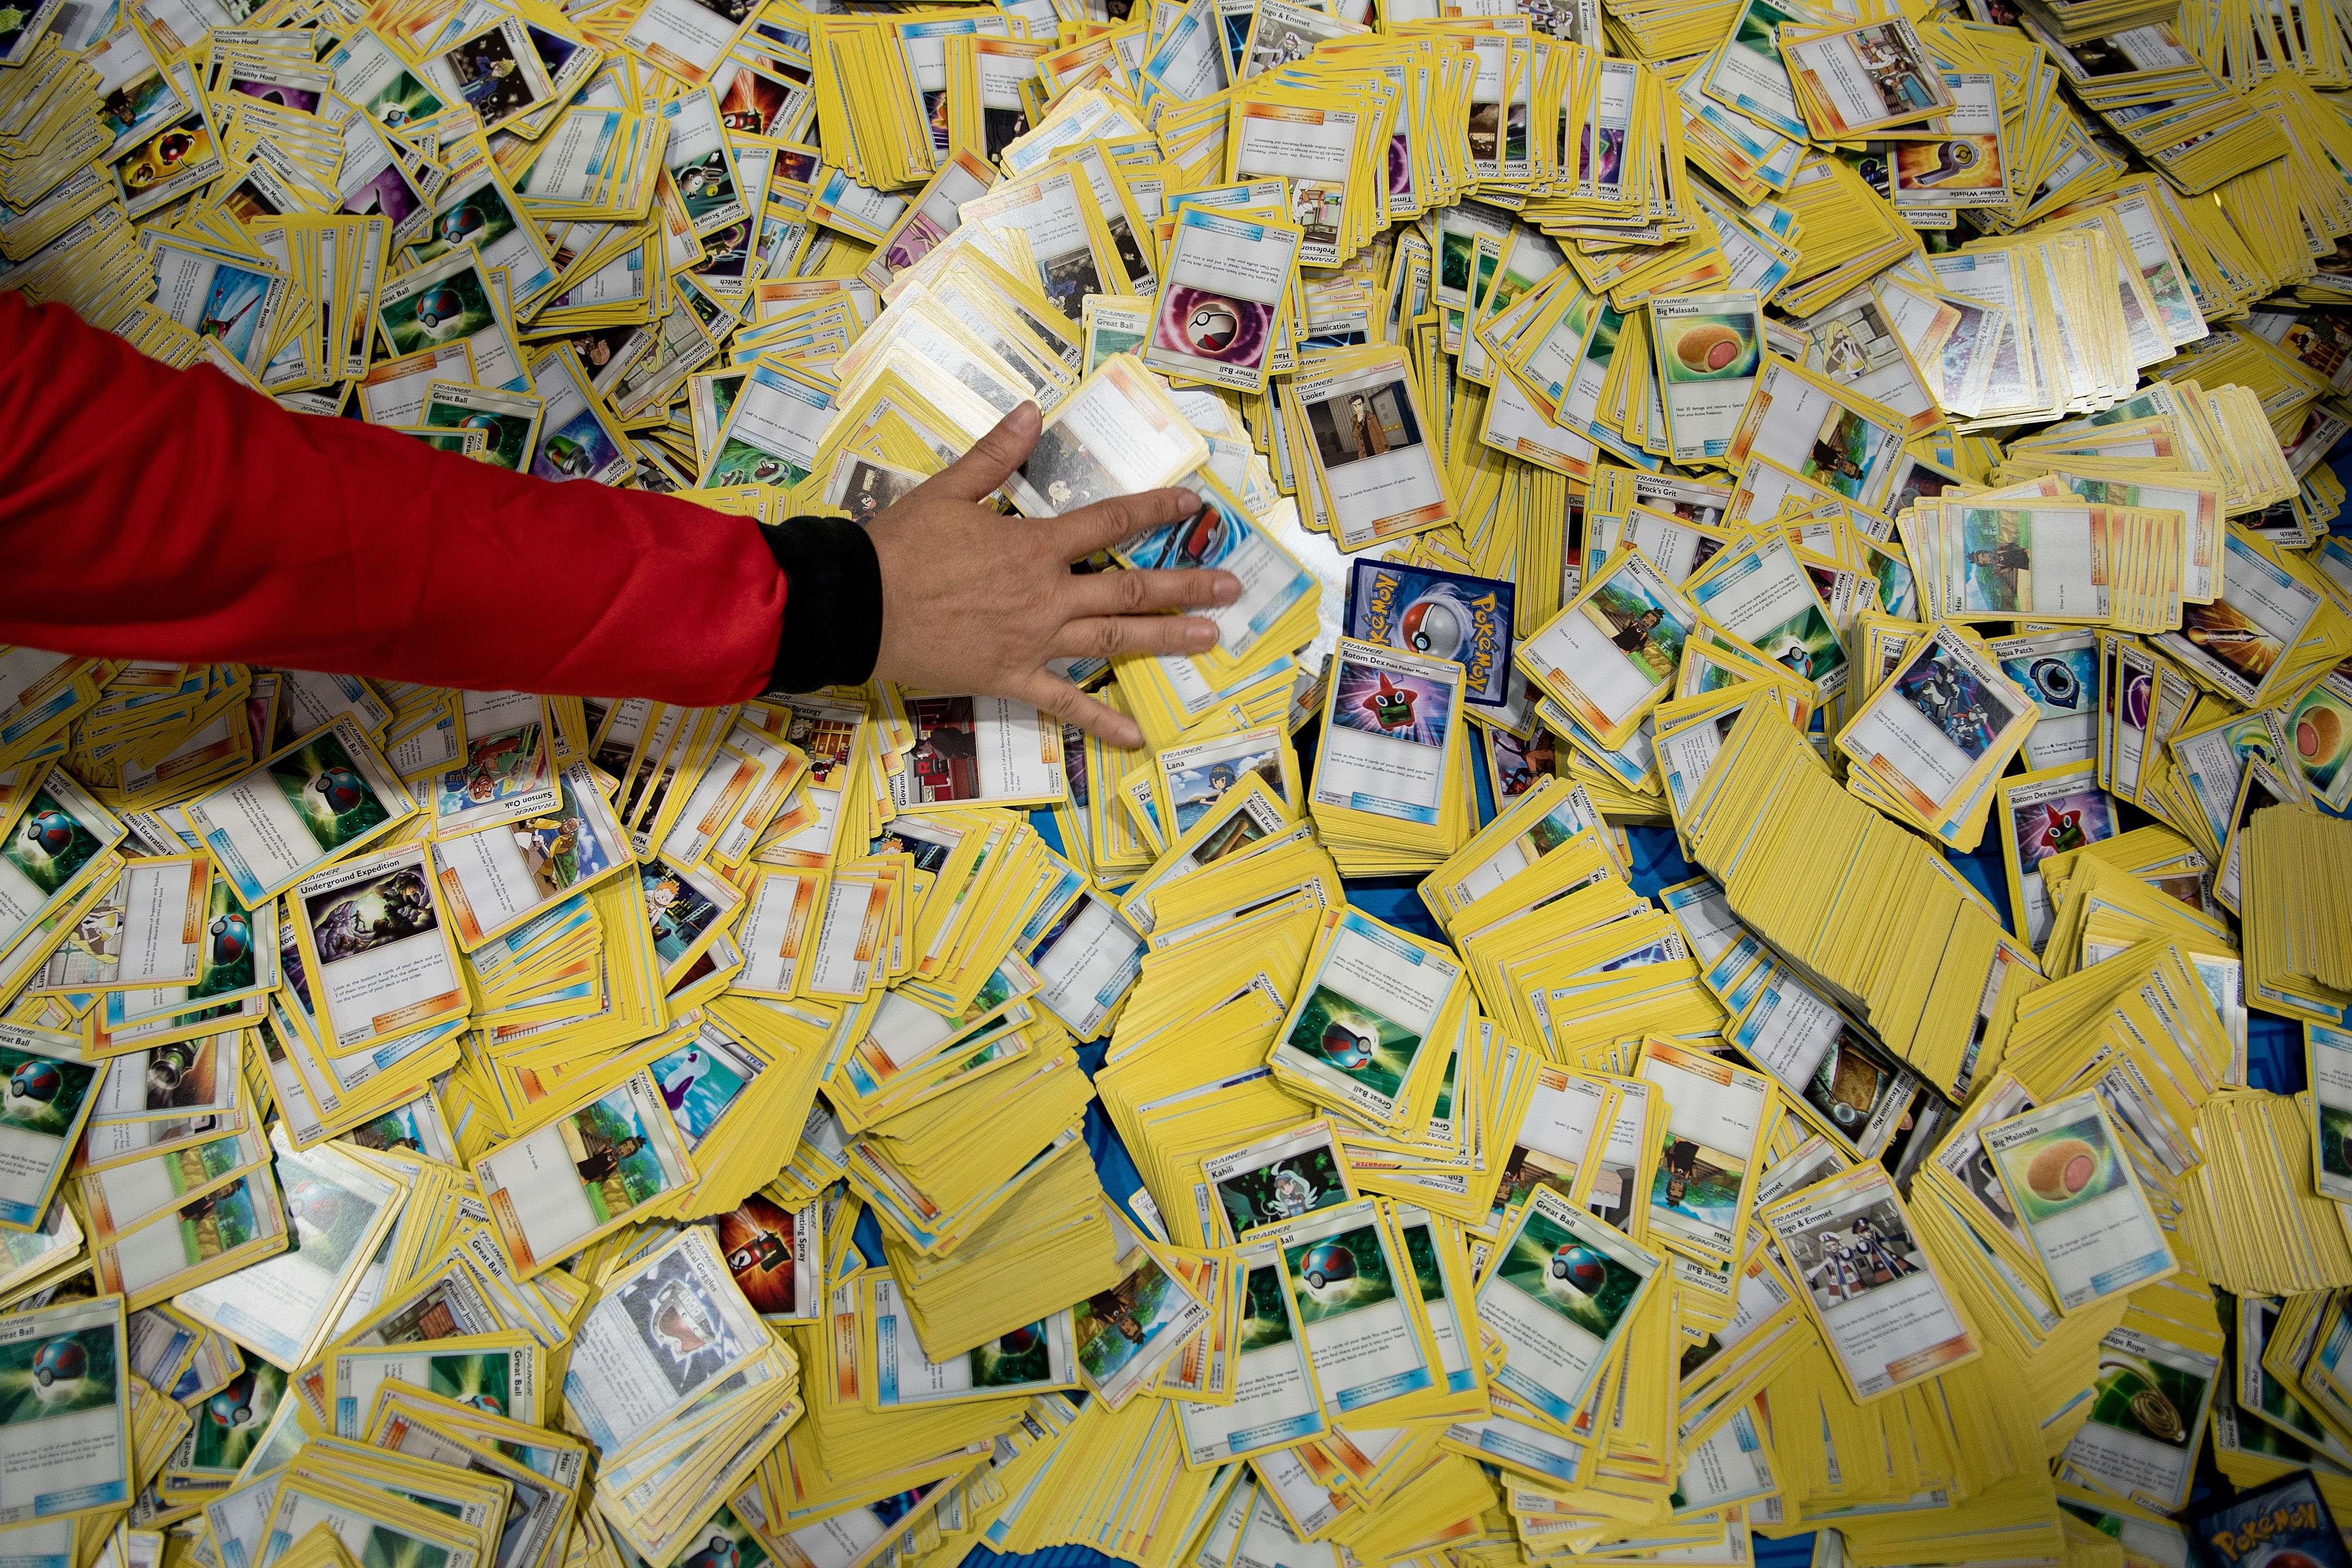 Pokemon fan discovers 20-year-old pack of trading cards at Target